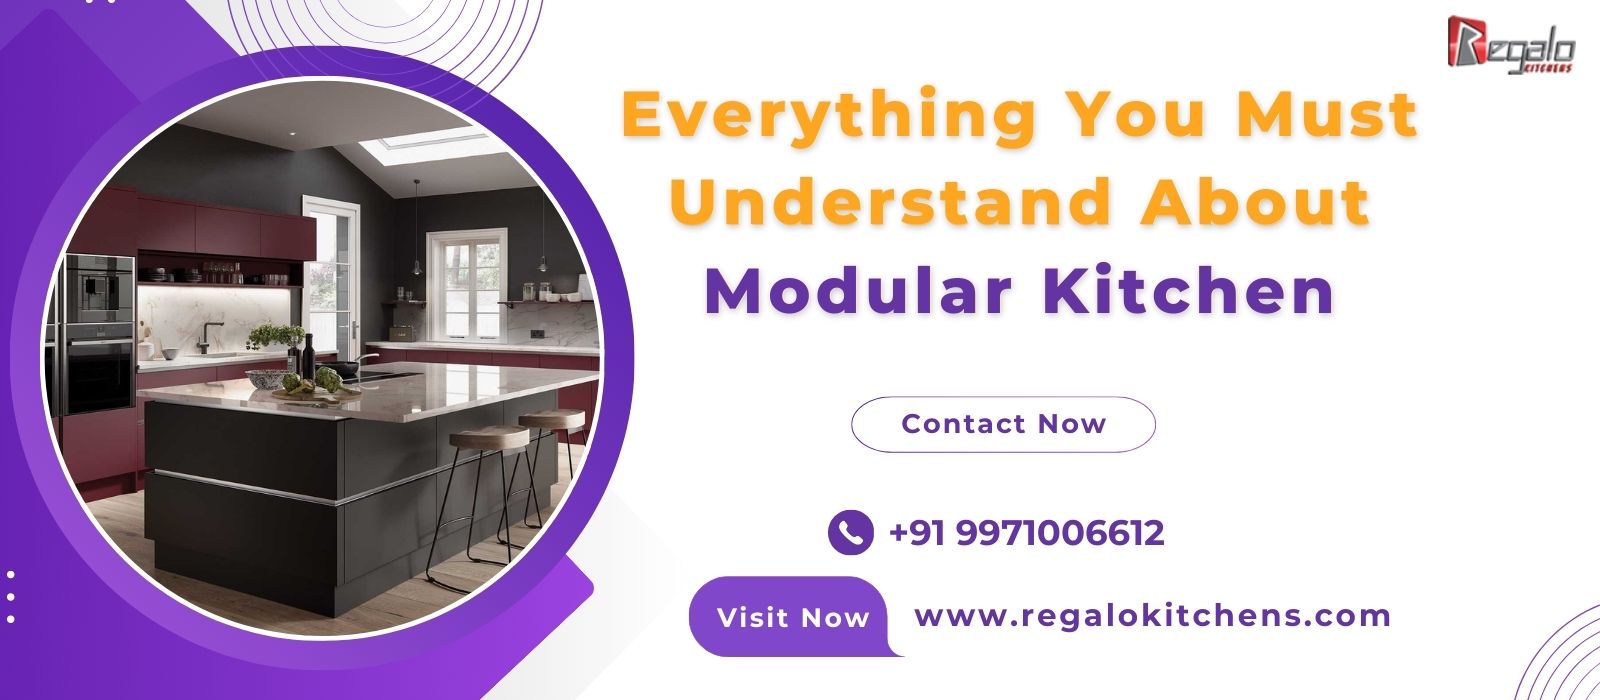 Everything You Must Understand About Modular Kitchen